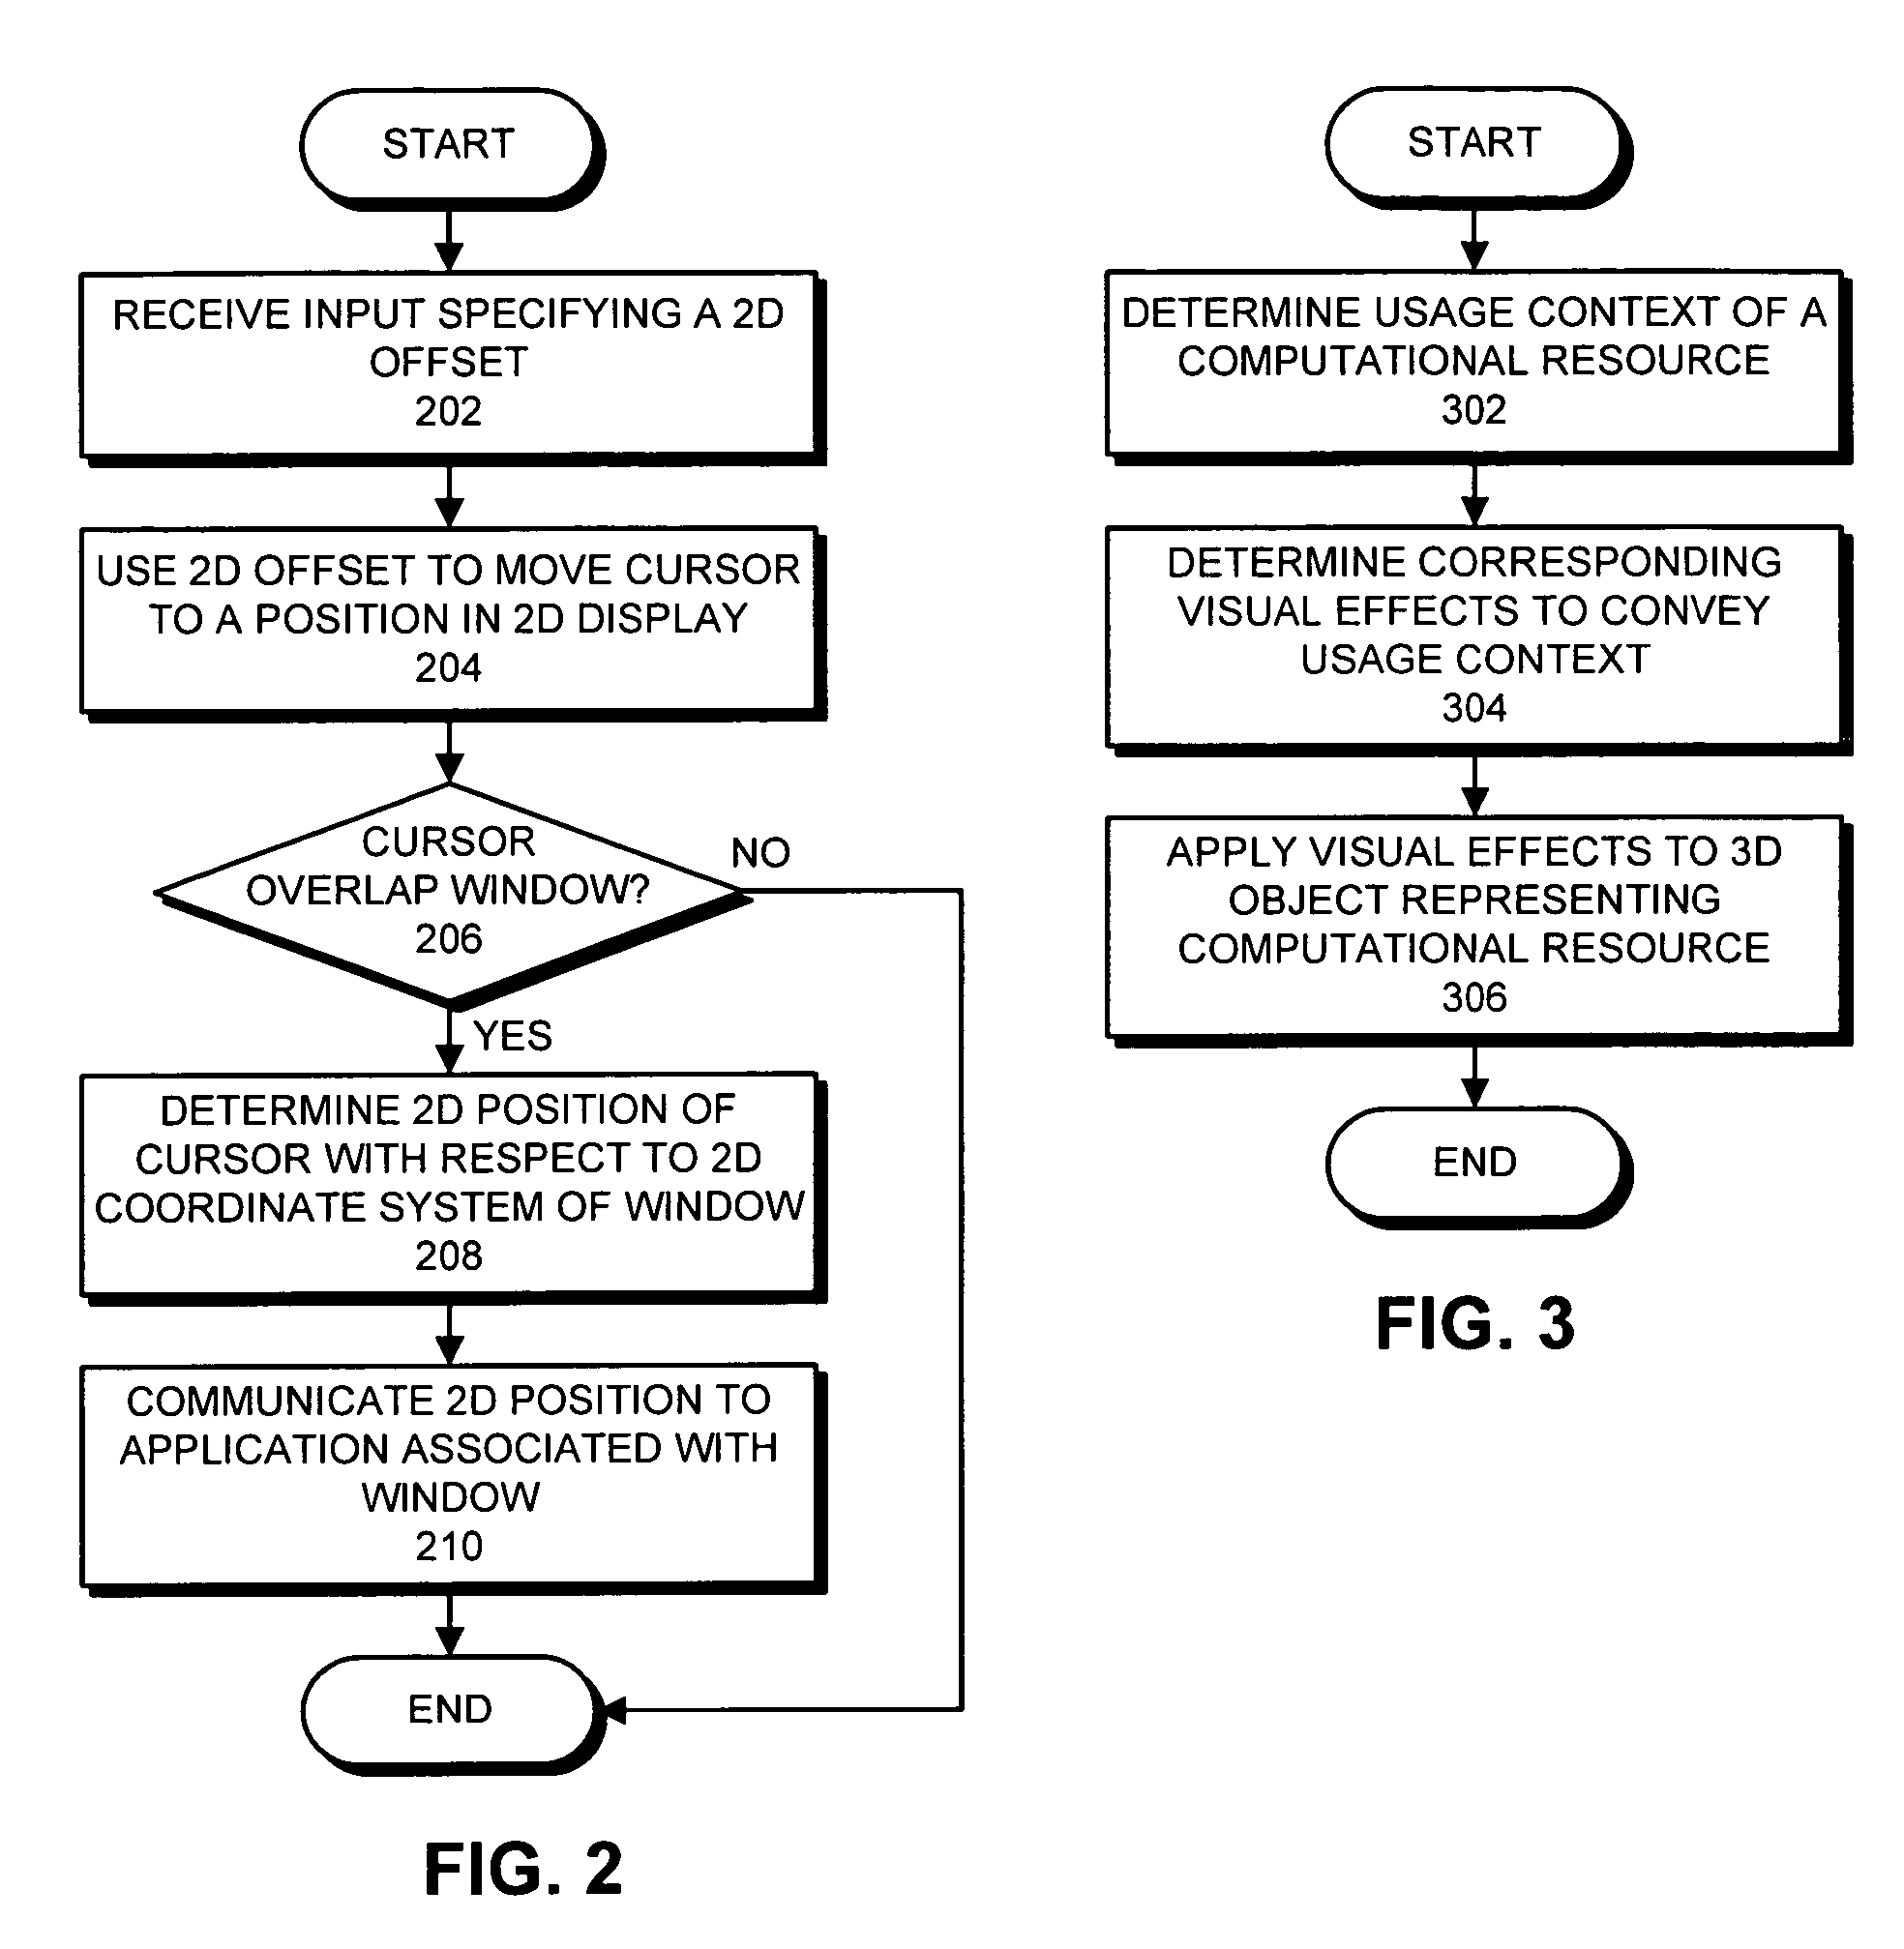 Method and apparatus for indicating a usage context of a computational resource through visual effects